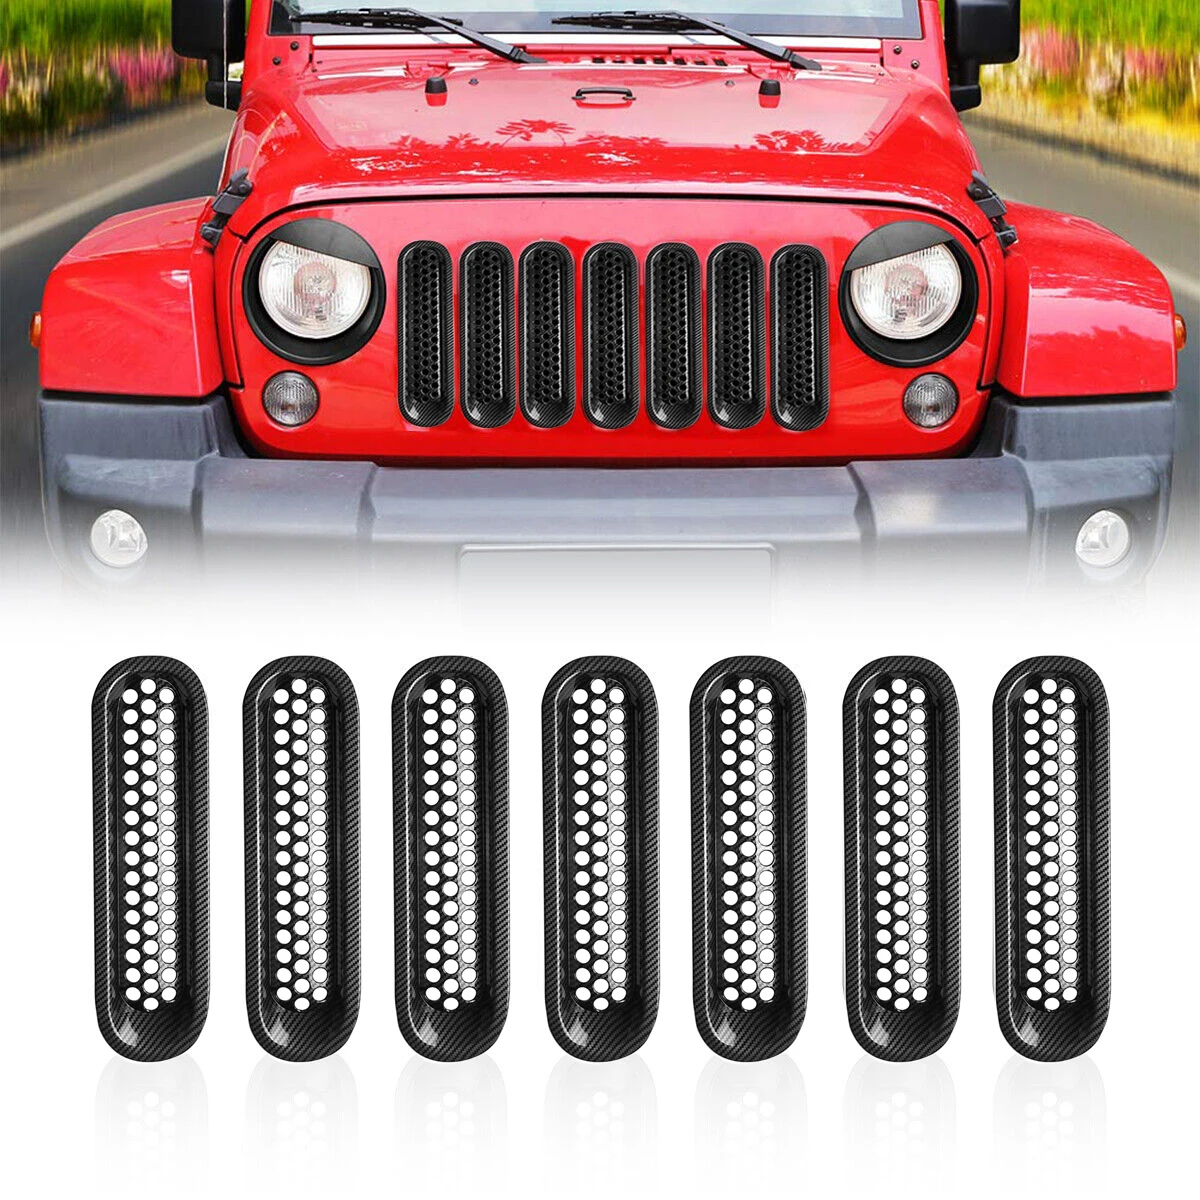 

Mesh Front Racing Grills Insert Grille Cover Trim With Buckle for Jeep Wrangler JK 2007-2017 ABS 7Pcs Car Exterior Accessories